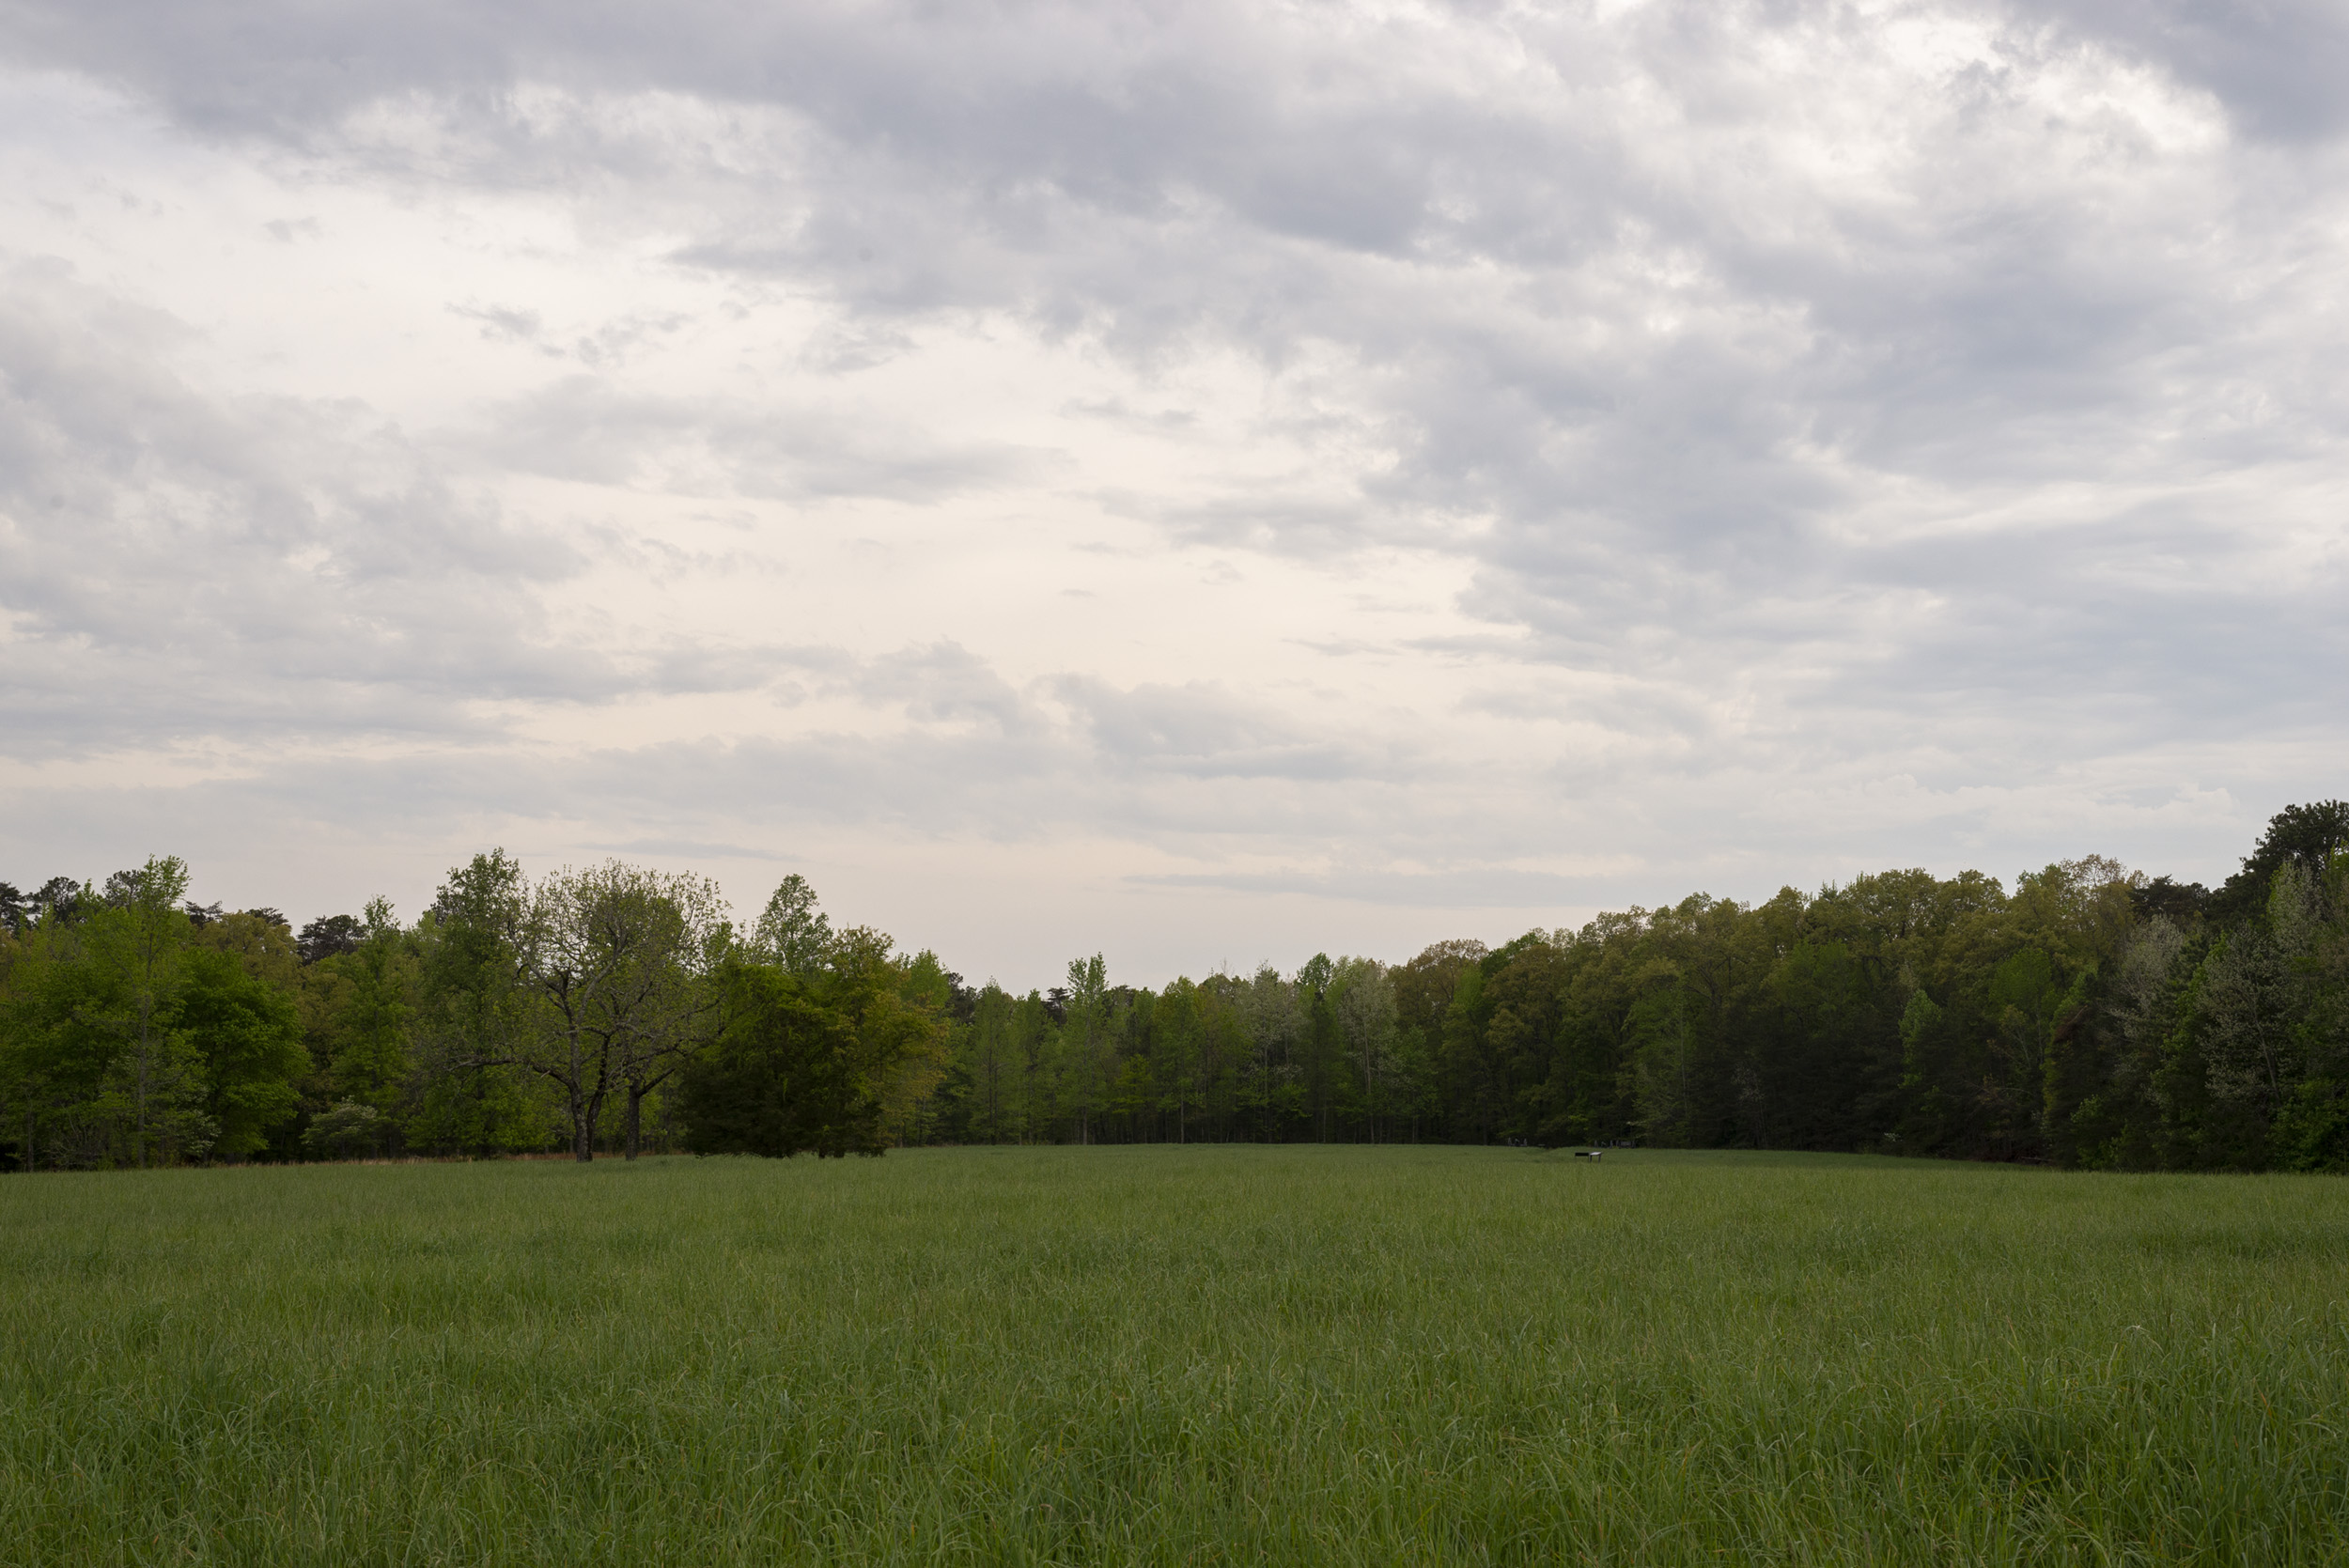 An open grassy field with trees in the distance.